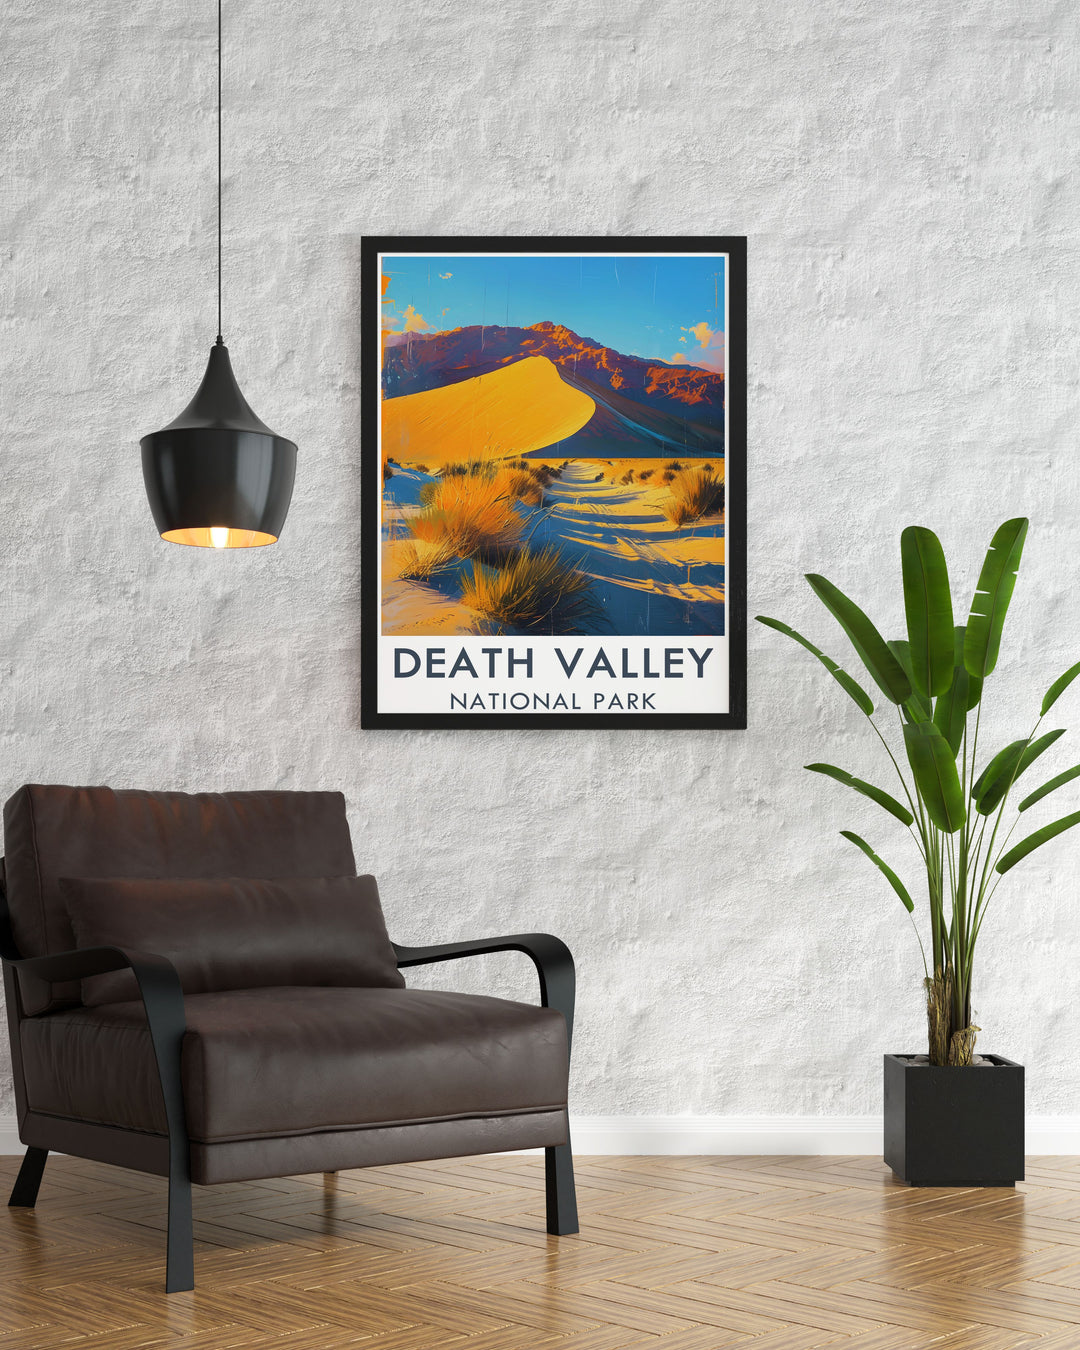 A detailed print of Death Valley National Park showcasing the expansive desert landscape and the iconic Mesquite Flat Sand Dunes, perfect for nature enthusiasts and those who appreciate unique geological features.